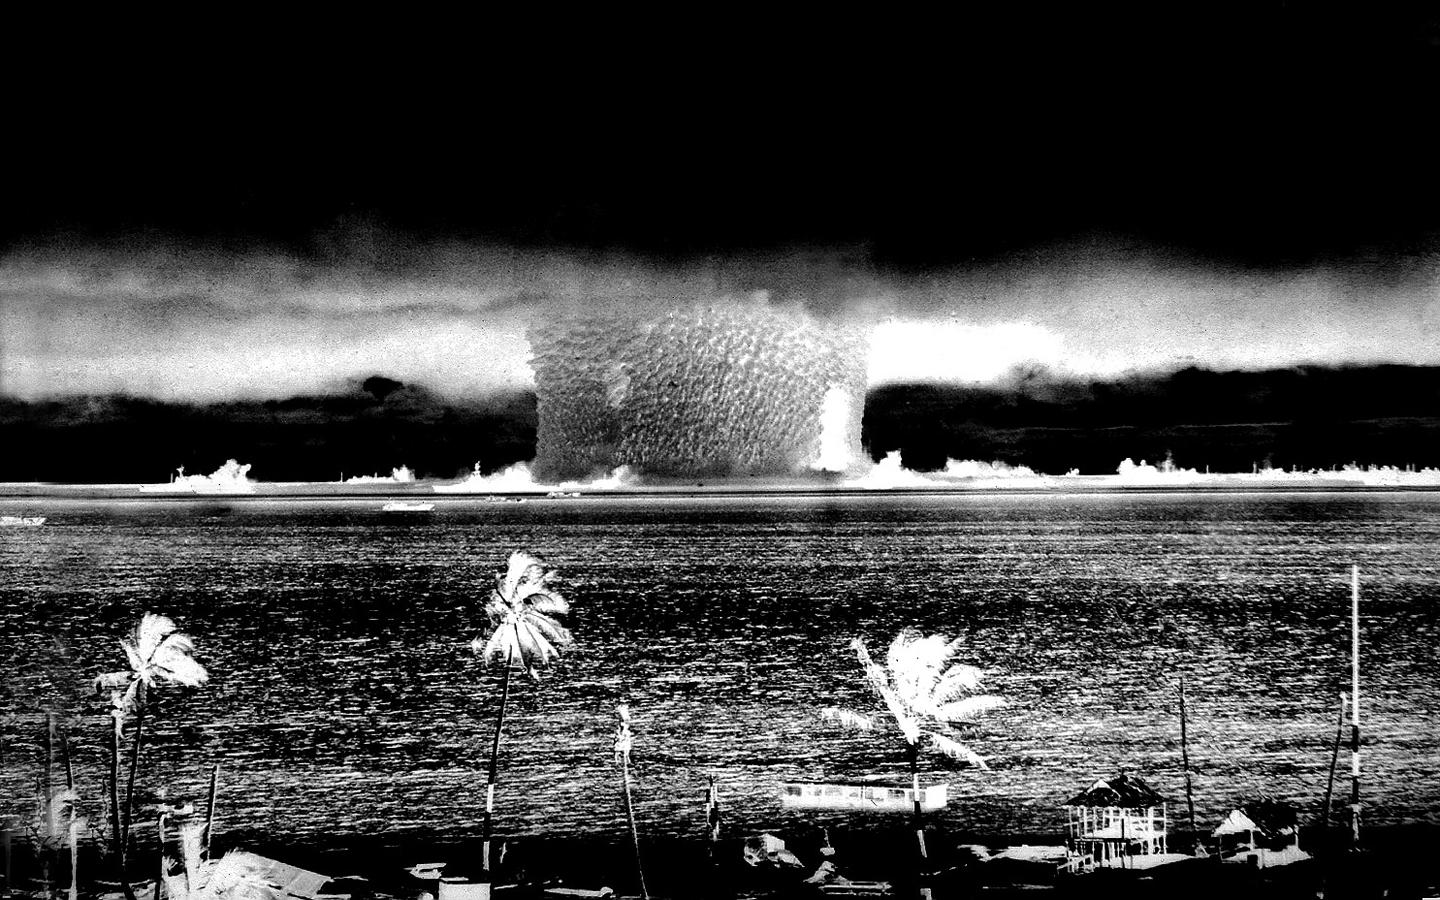 explosions nuclear underwater test explosion HD Wallpaper of Army